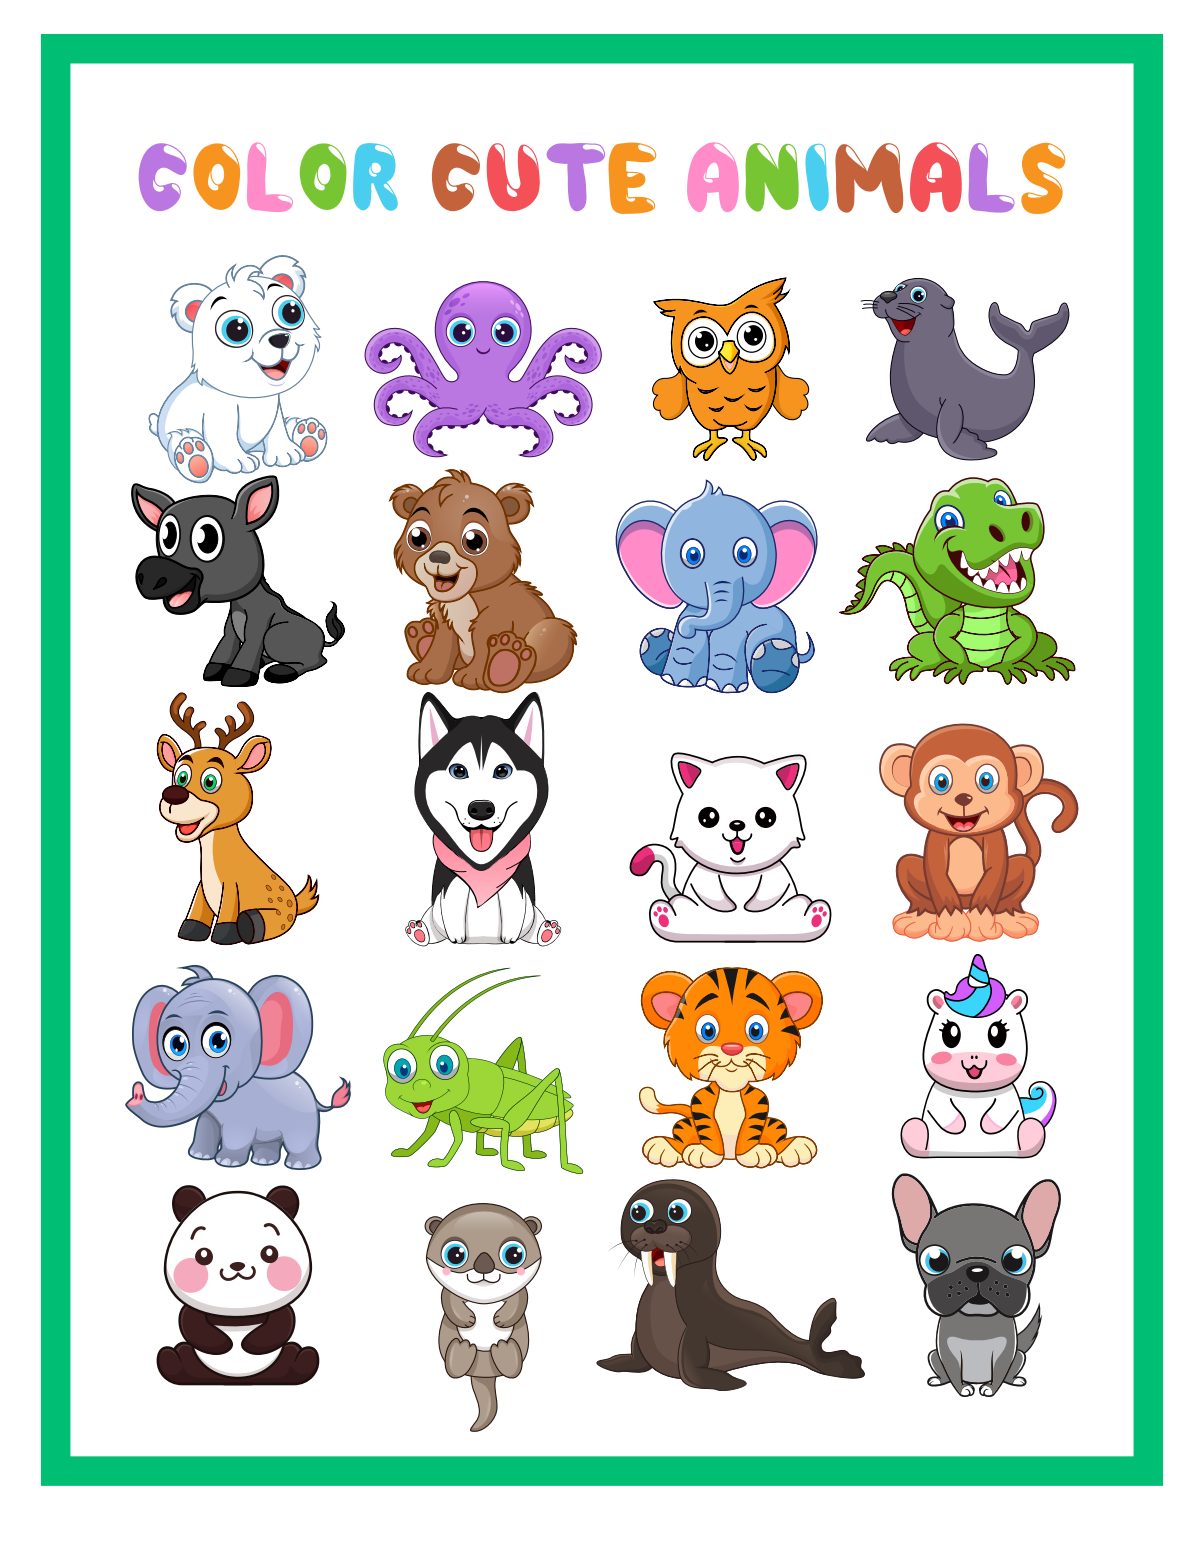 Rich Results on Google's SERP when searching for '38. Color Cute Animals'